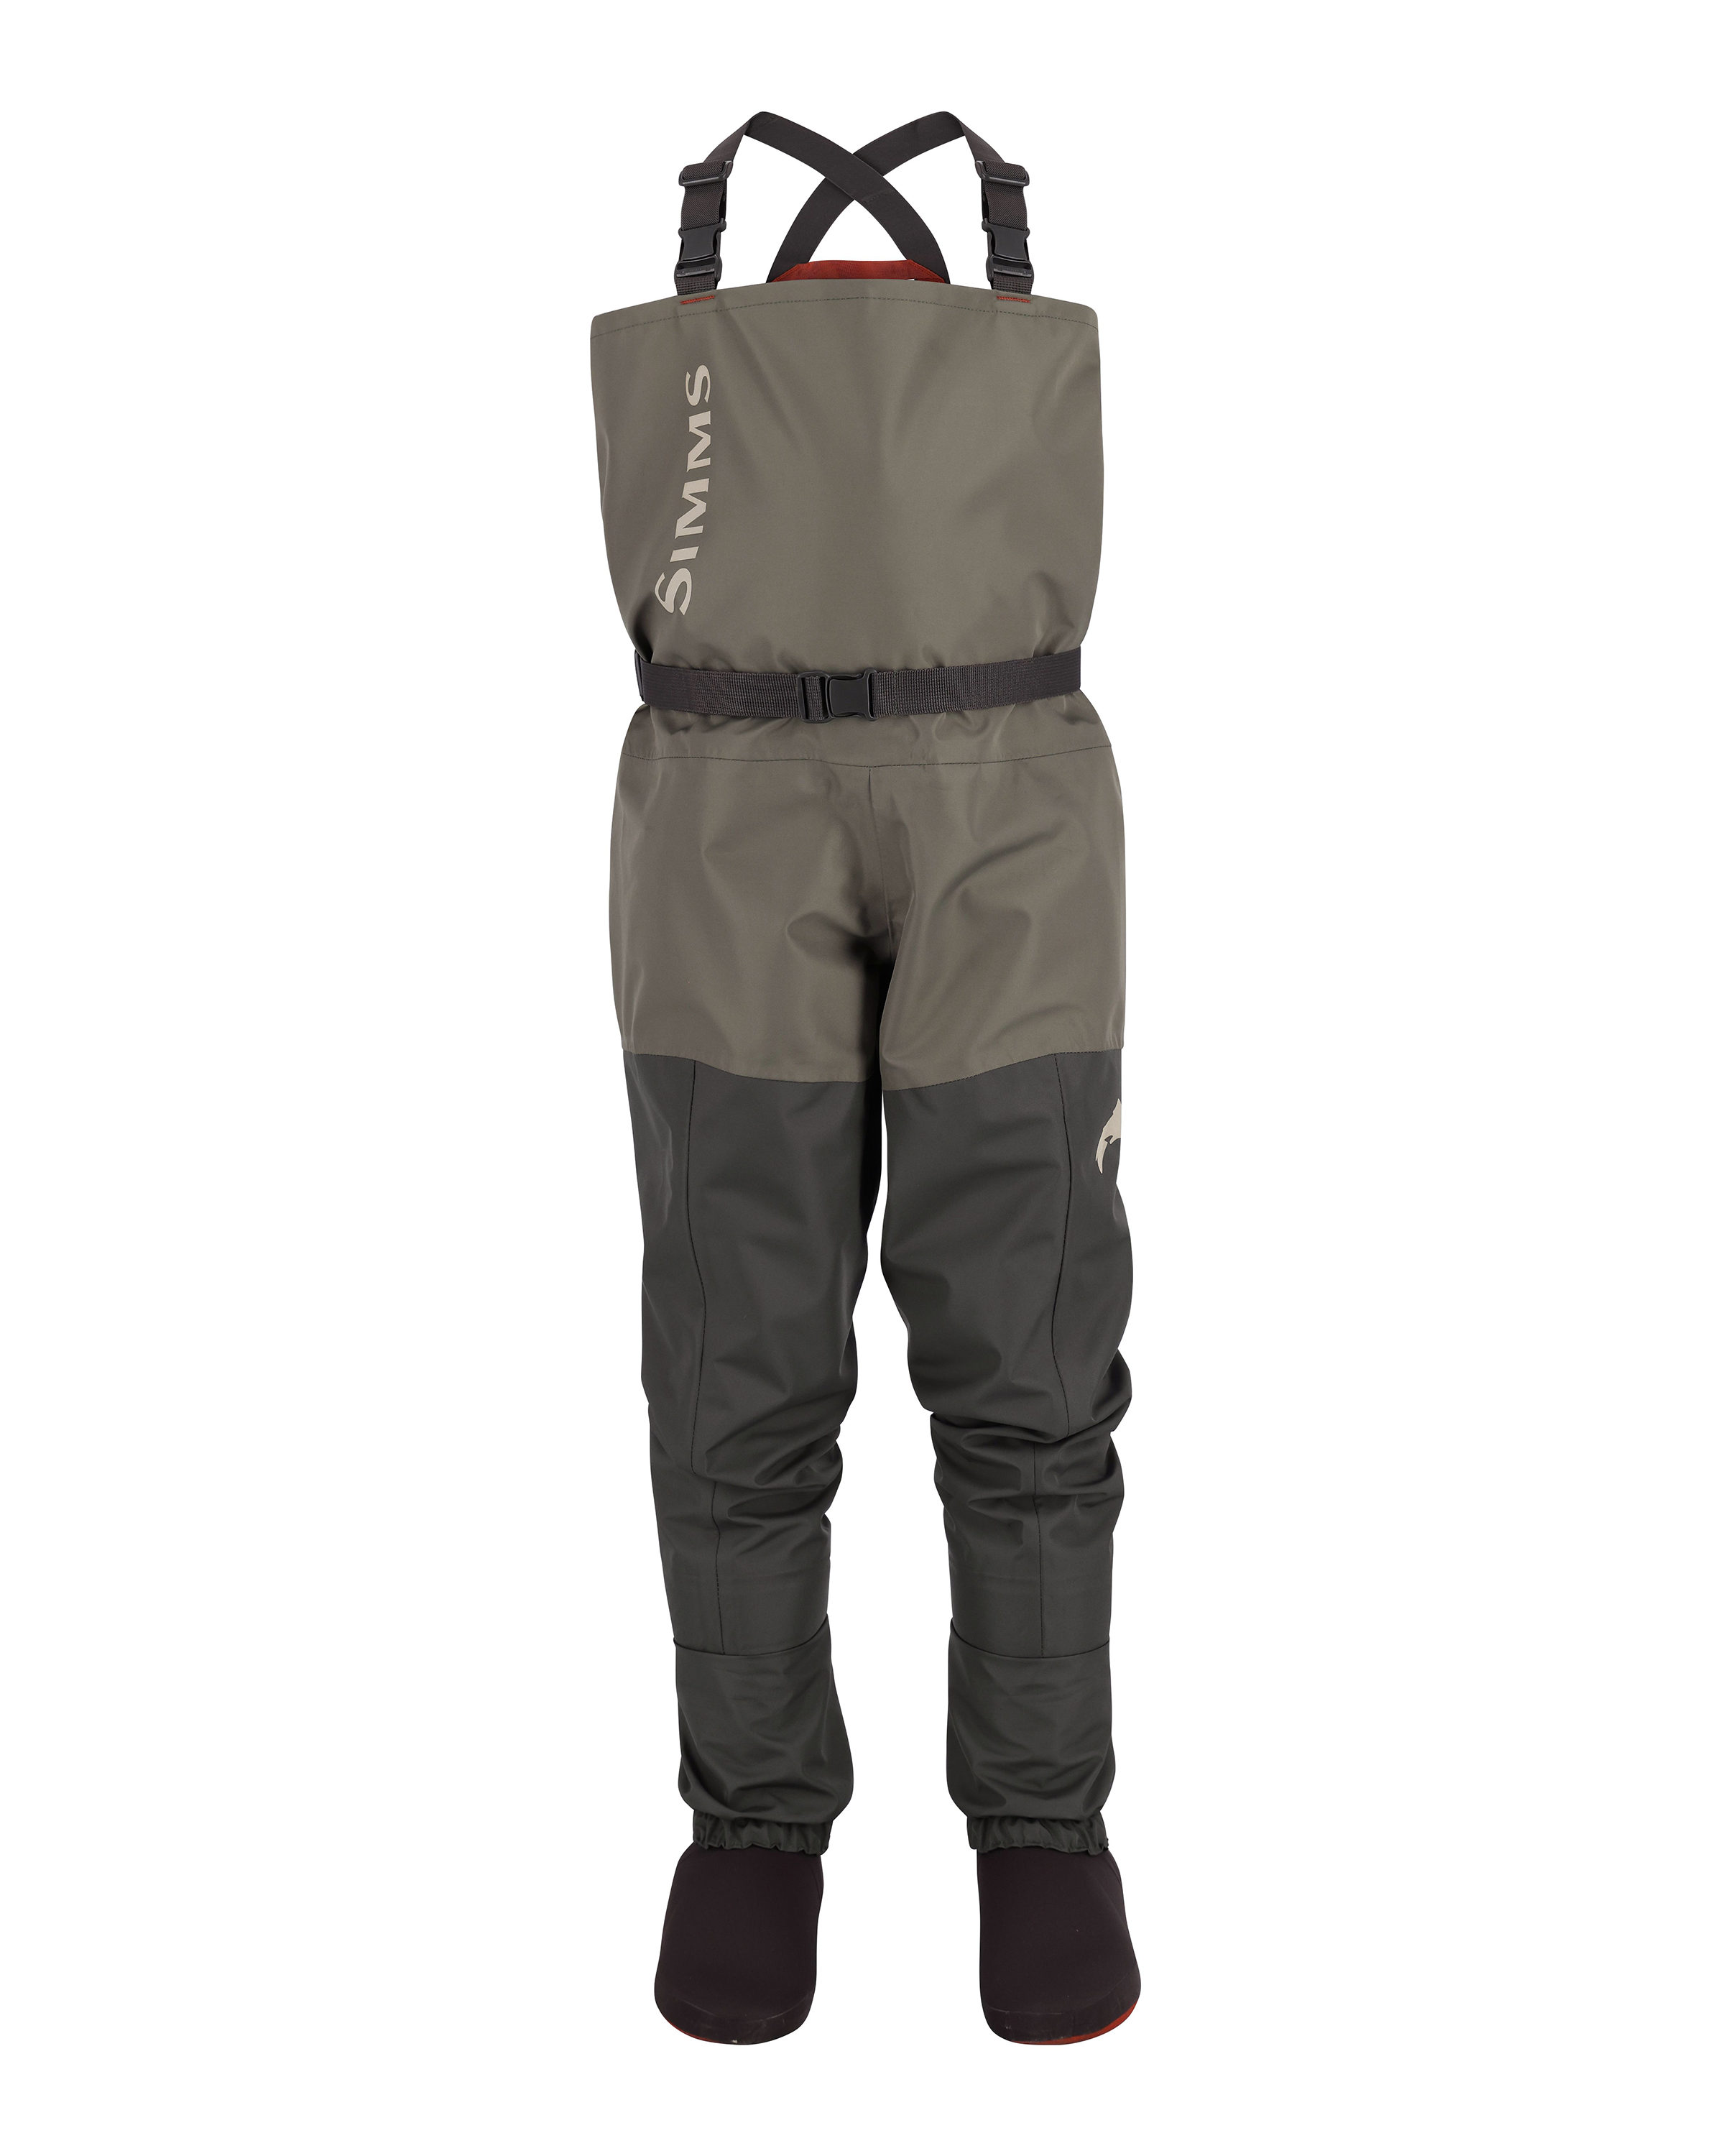 Simms Tributary Stockingfoot Waders for Kids